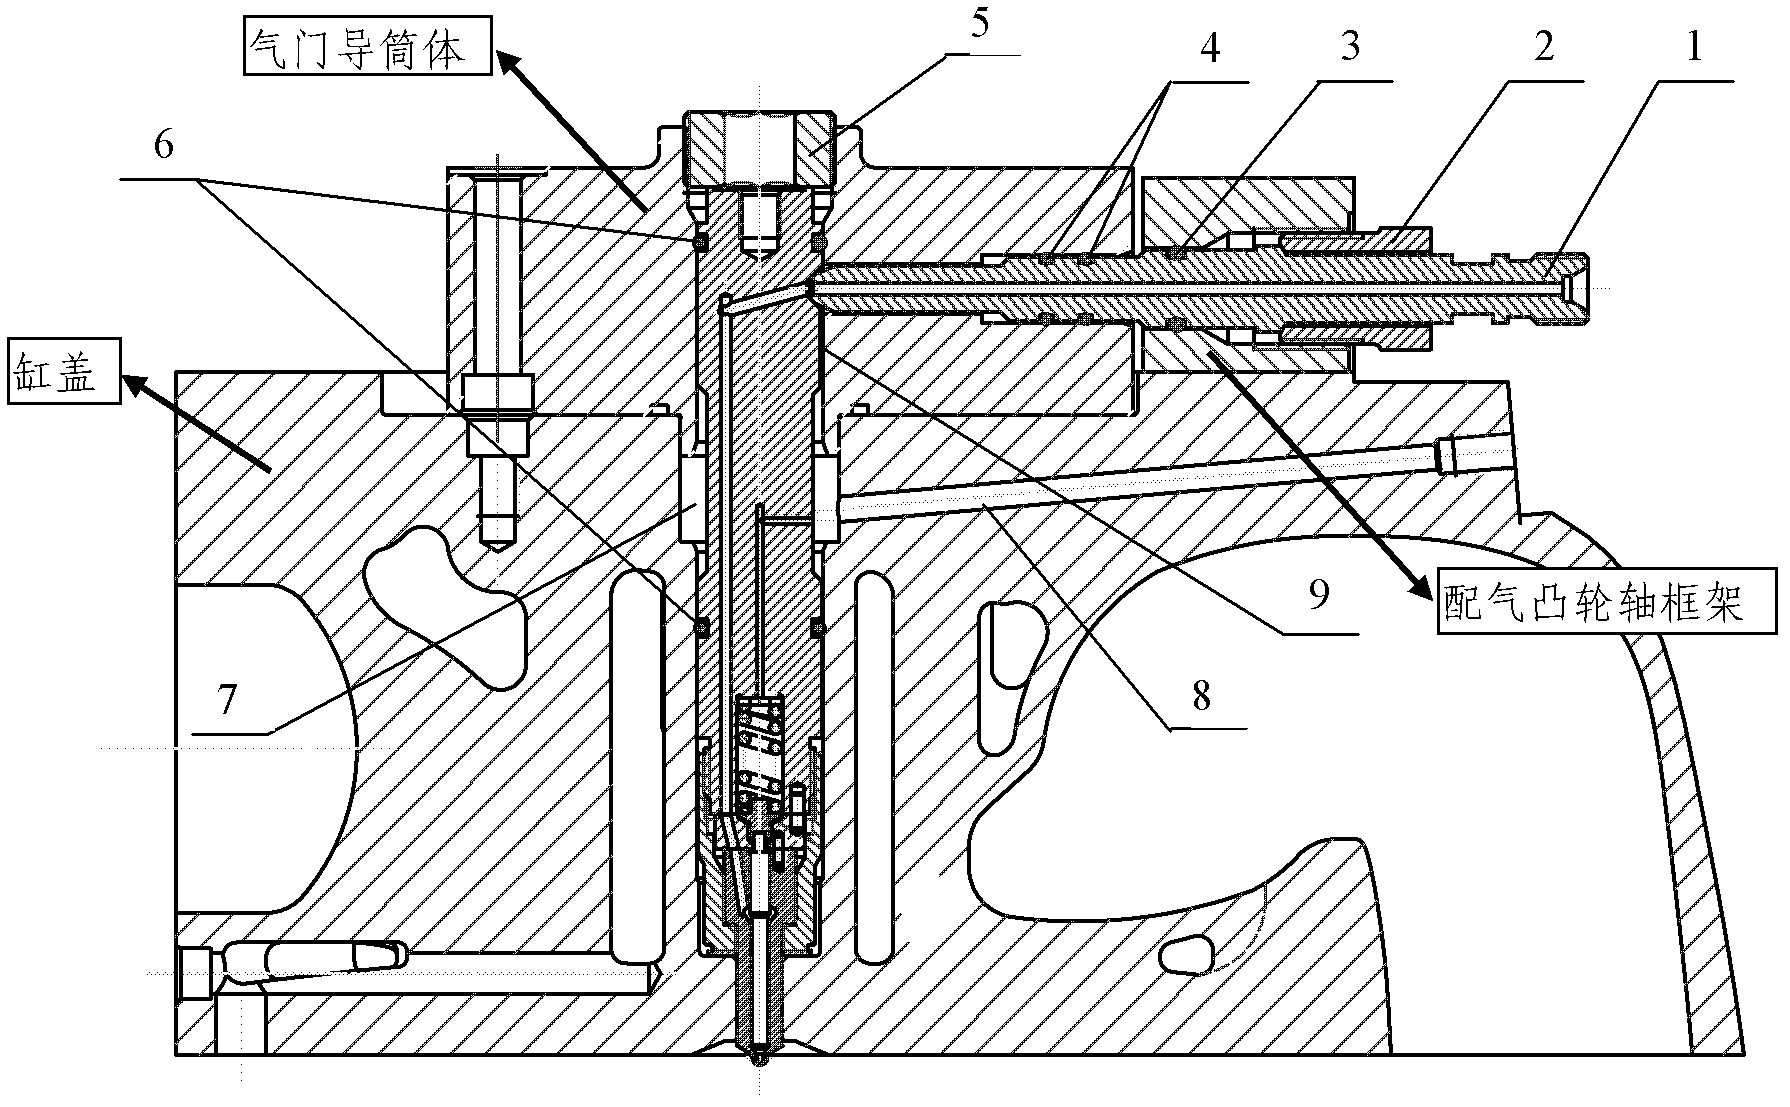 Embedded oil charging structure for high-pressure fuel oil system